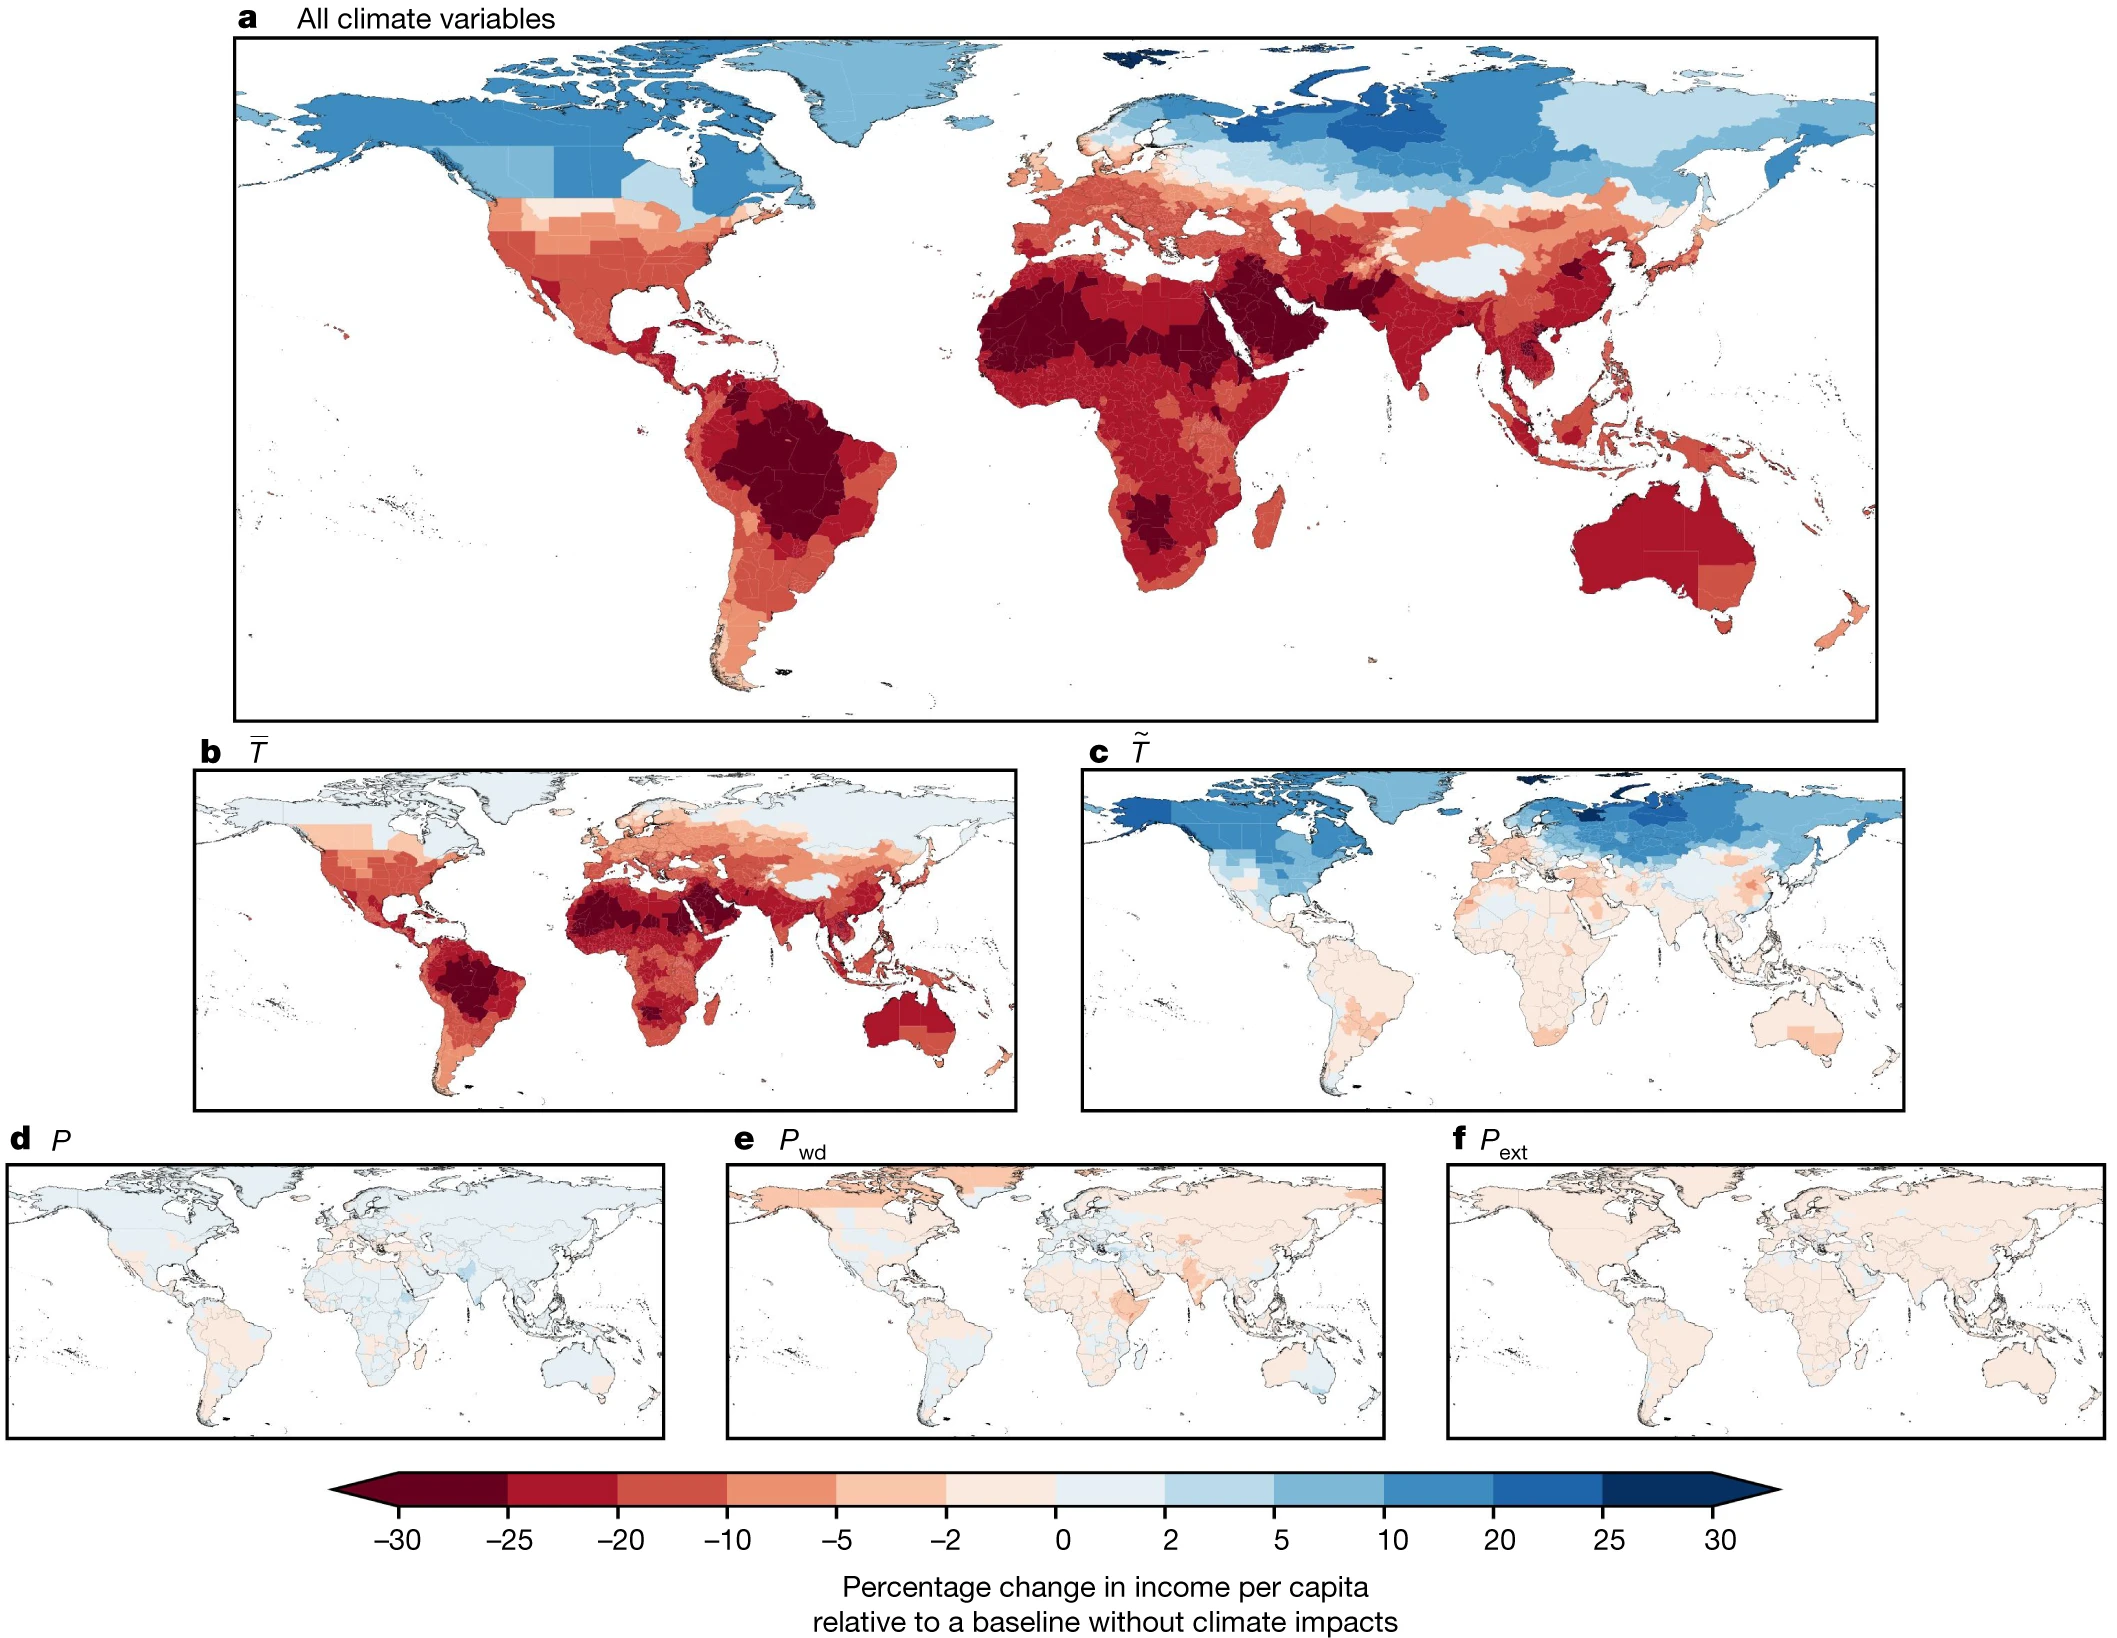 The committed economic damages of climate change by sub-national region and climatic component. Estimates of the median projected reduction in sub-national income per capita across emission scenarios (SSP2-RCP2.6 and SSP2-RCP8.5) as well as climate model, empirical model and model parameter uncertainty in the year in which climate damages diverge at the 5 percent level (2049, as identified in Fig. 1). a, Impacts arising from all climate variables. b–f, Impacts arising separately from changes in annual mean temperature (b), daily temperature variability (c), total annual precipitation (d), the annual number of wet days (>1 mm) (e) and extreme daily rainfall (f) (see Methods for further definitions). Data on national administrative boundaries are obtained from the GADM database version 3.6 and are freely available for academic use (https://gadm.org/). Graphic: Kotz, et al., 2024 / Nature